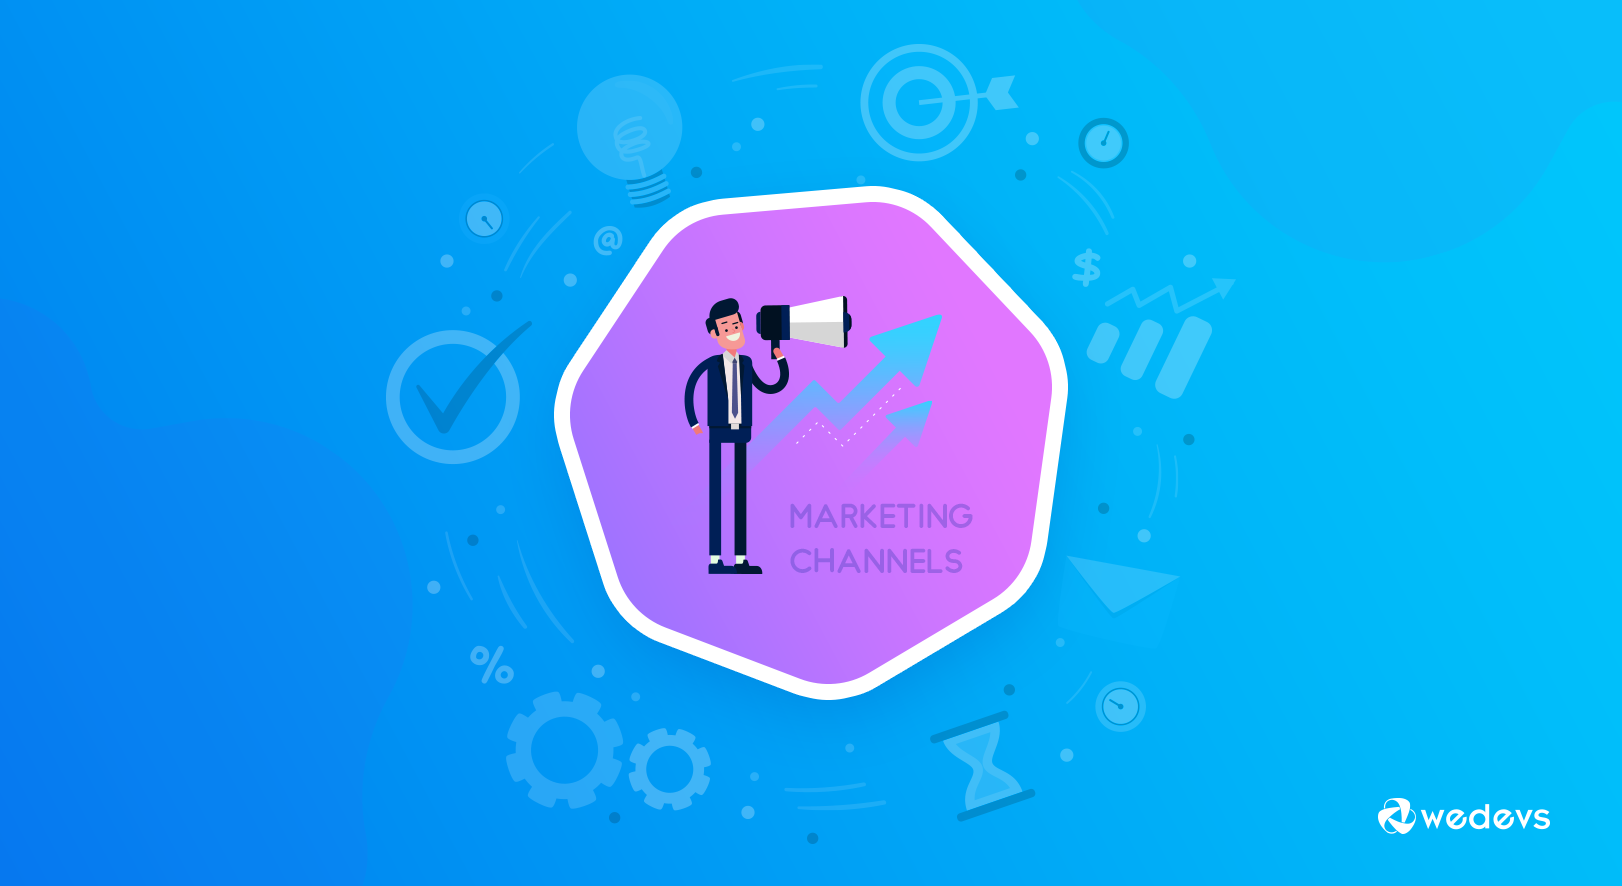 Top Marketing Channels To Boost Your Sales in 2022